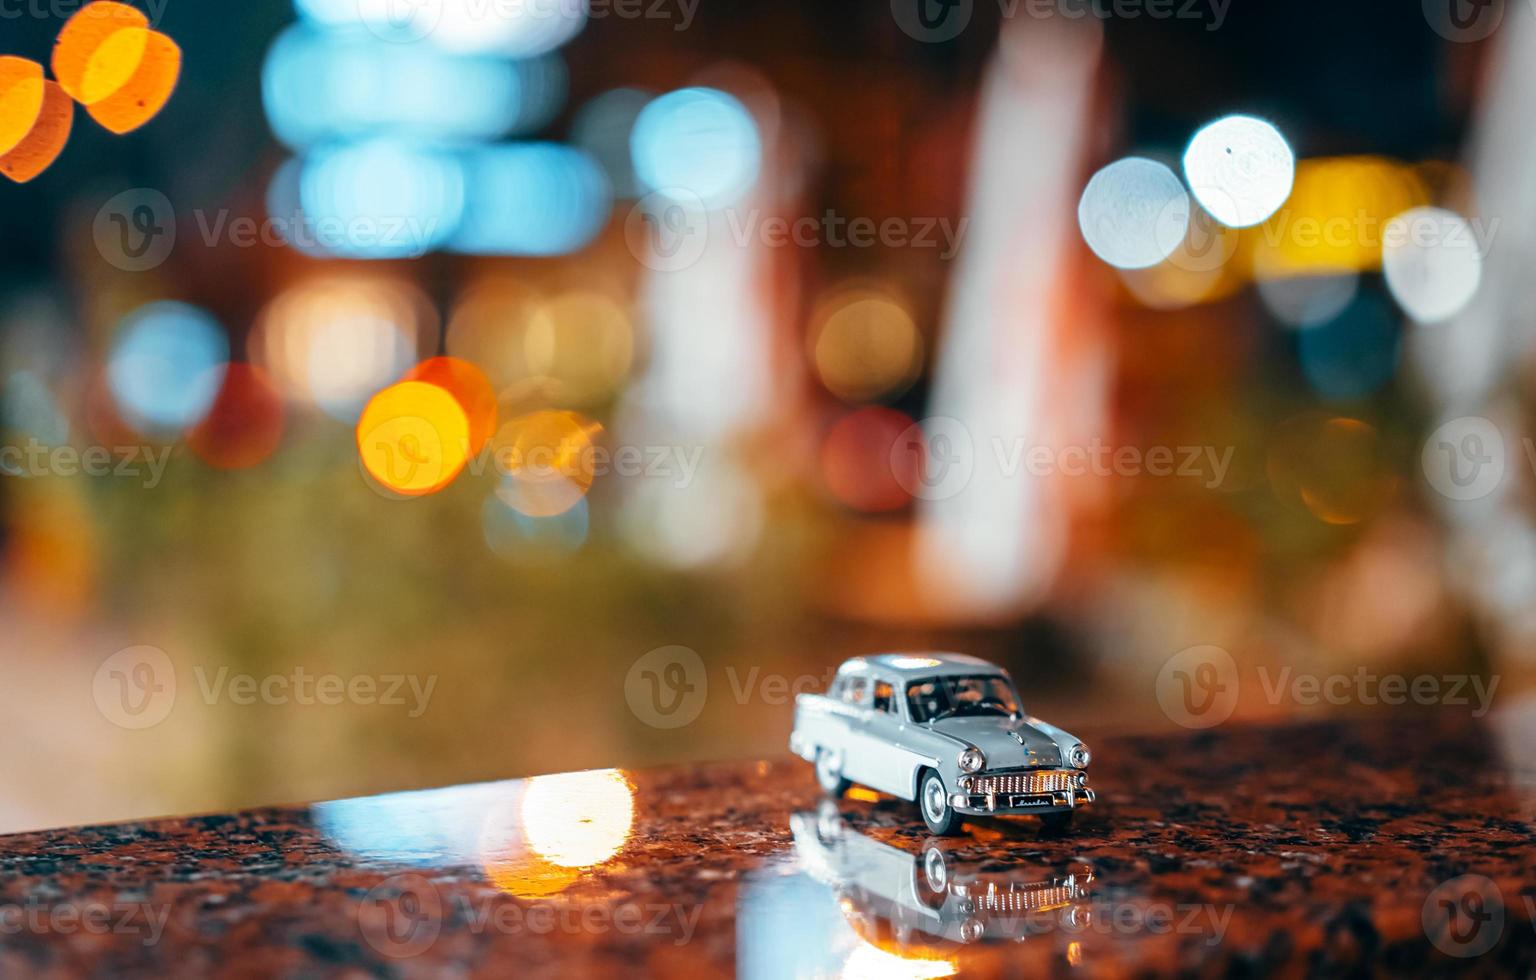 Moskvich 401 on the table, glowing background photo